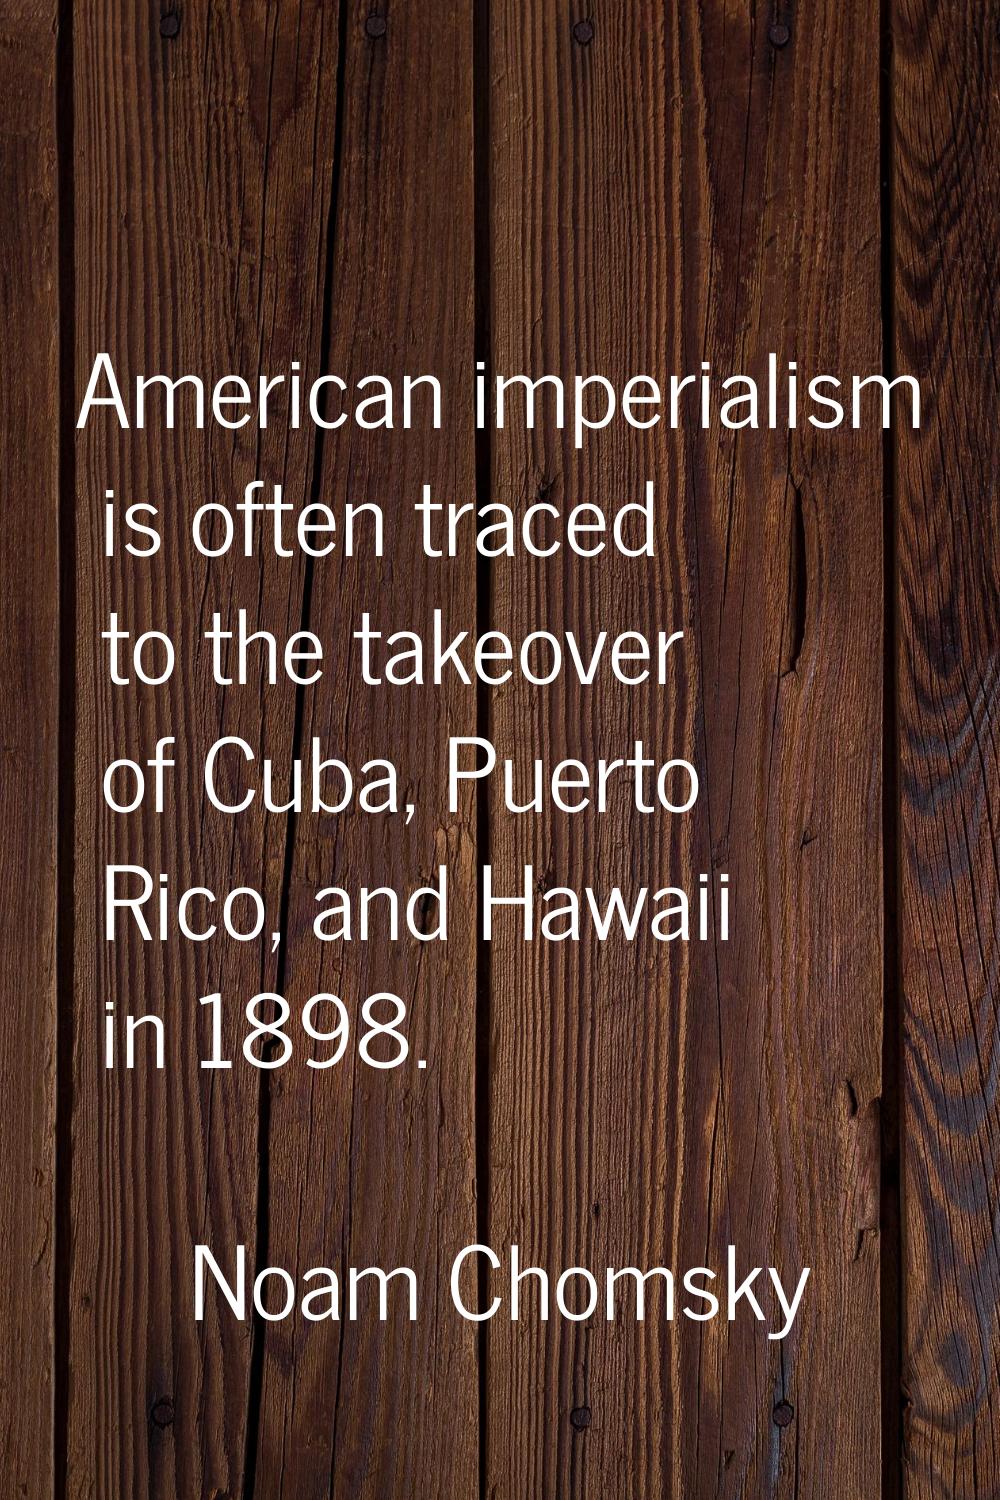 American imperialism is often traced to the takeover of Cuba, Puerto Rico, and Hawaii in 1898.